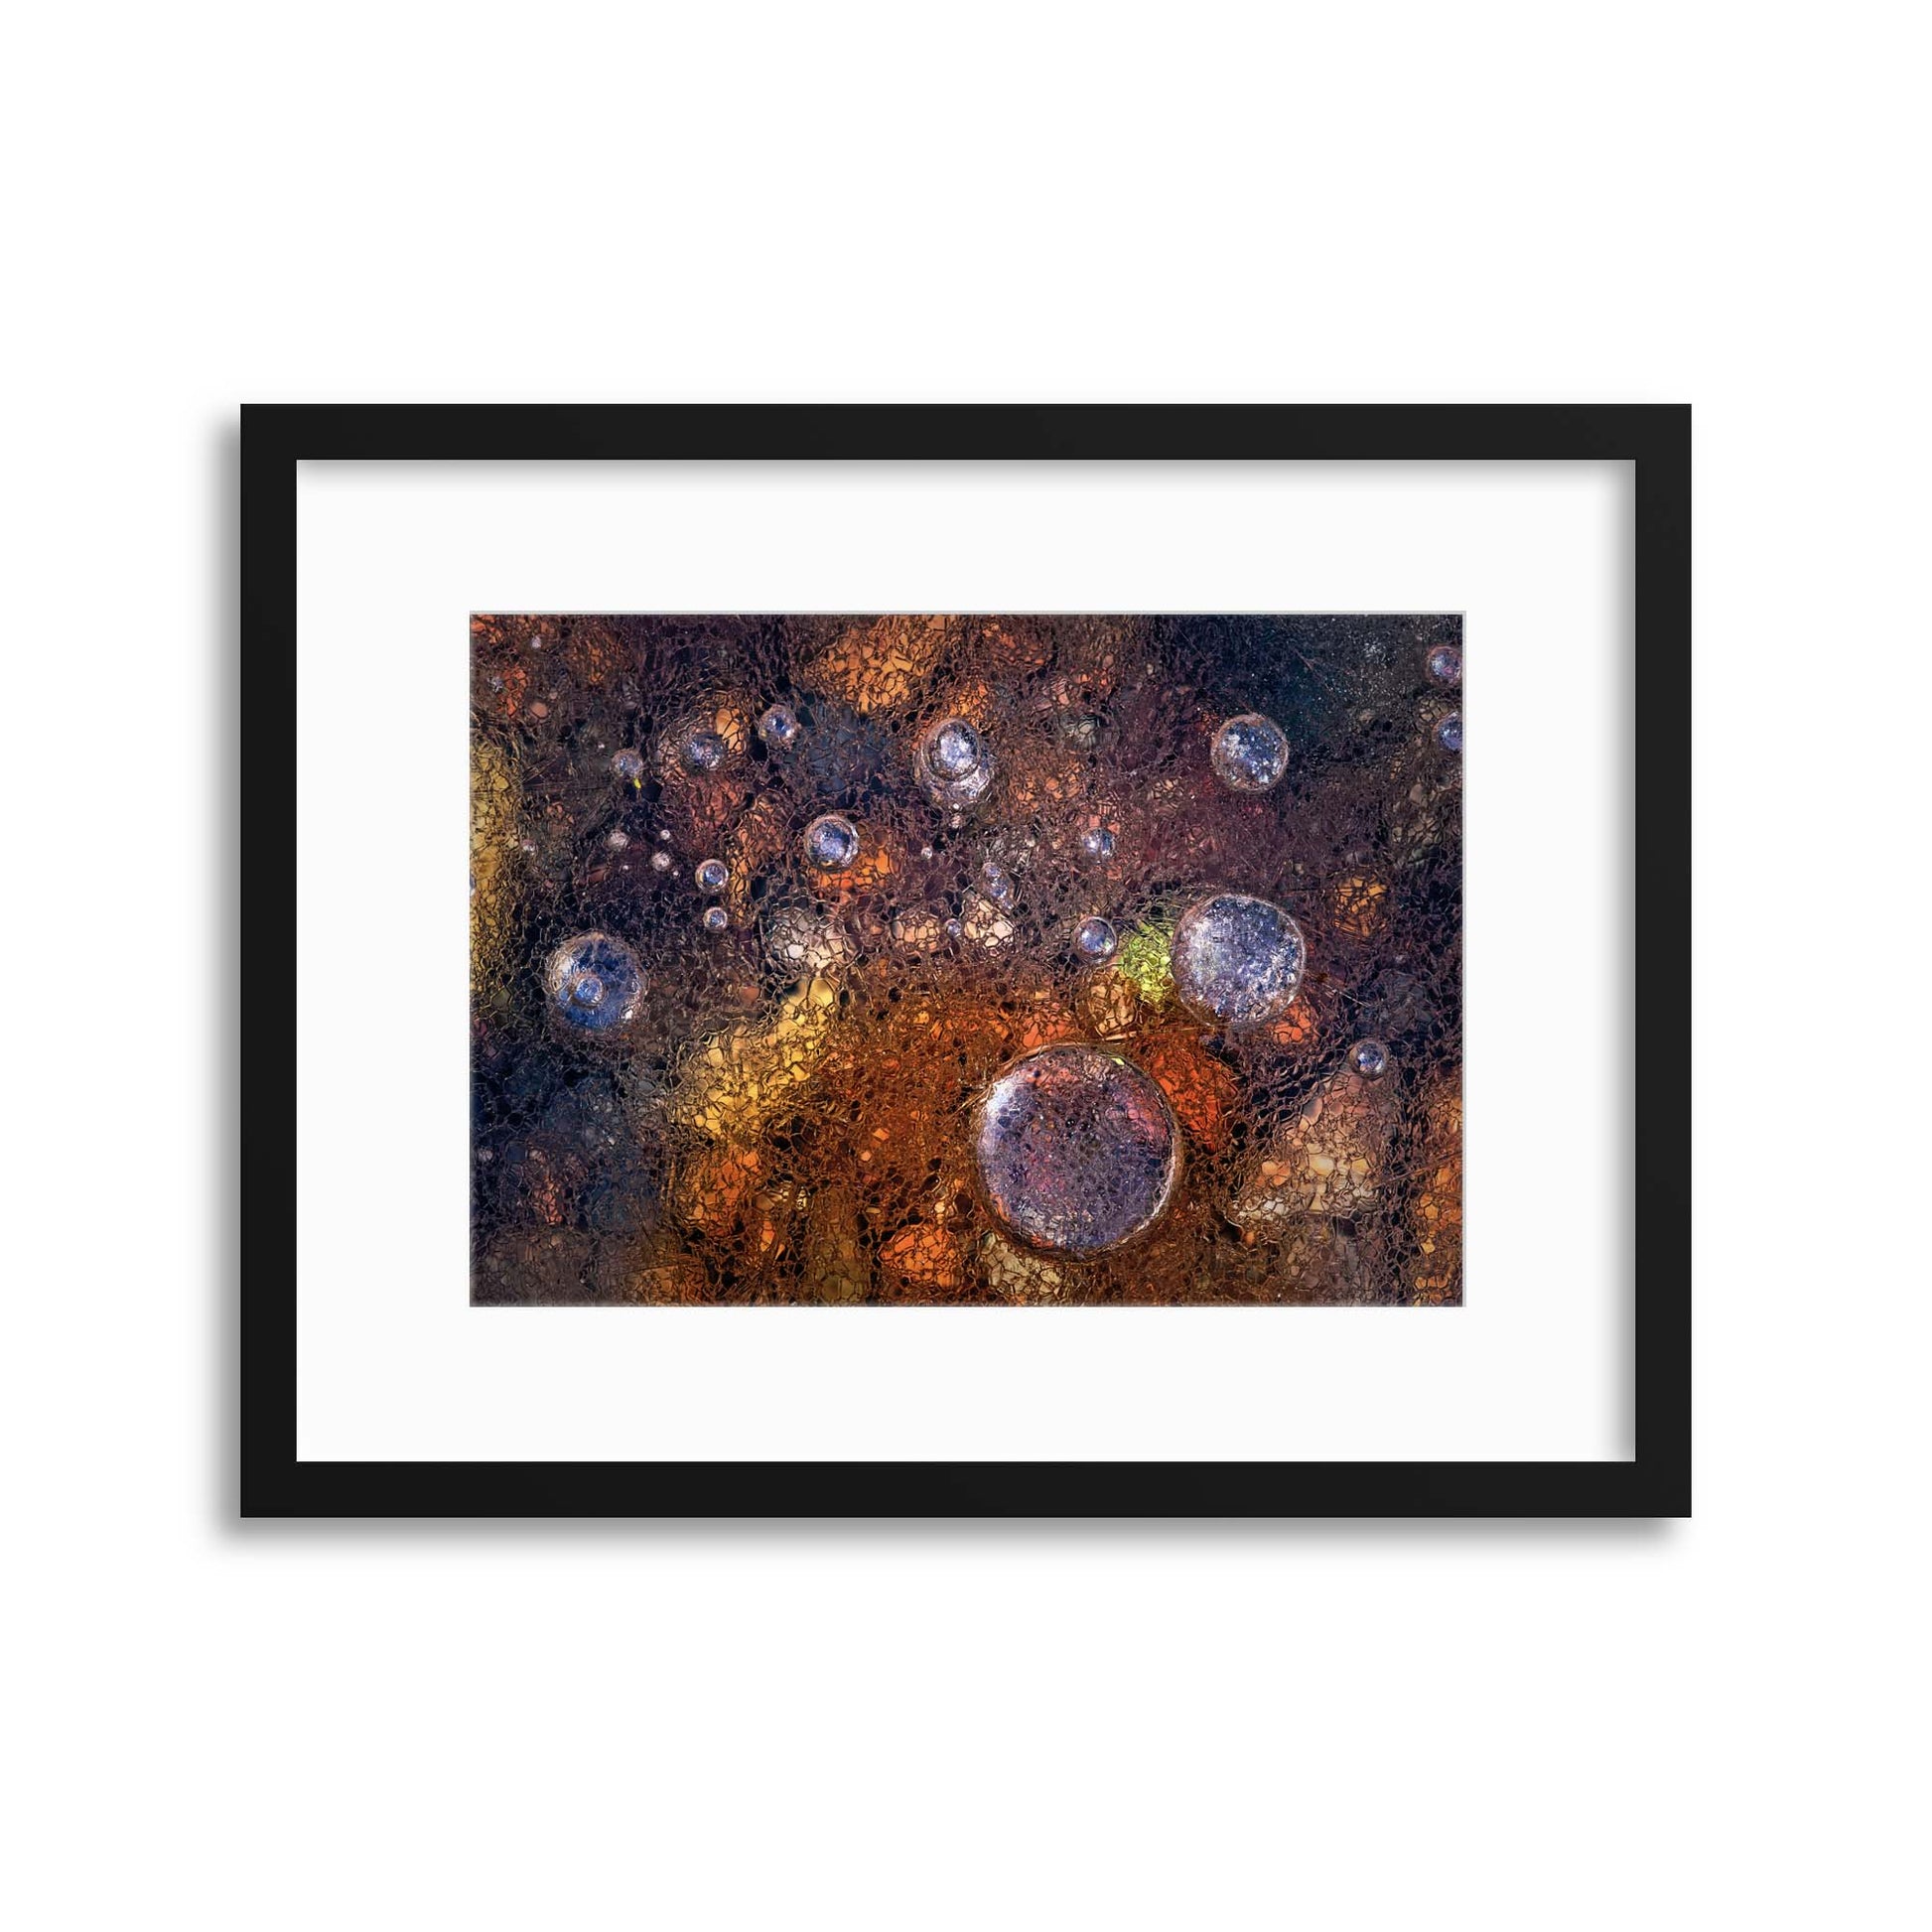 Winter Over Autumn by Paolo Giudici Framed Print - USTAD HOME